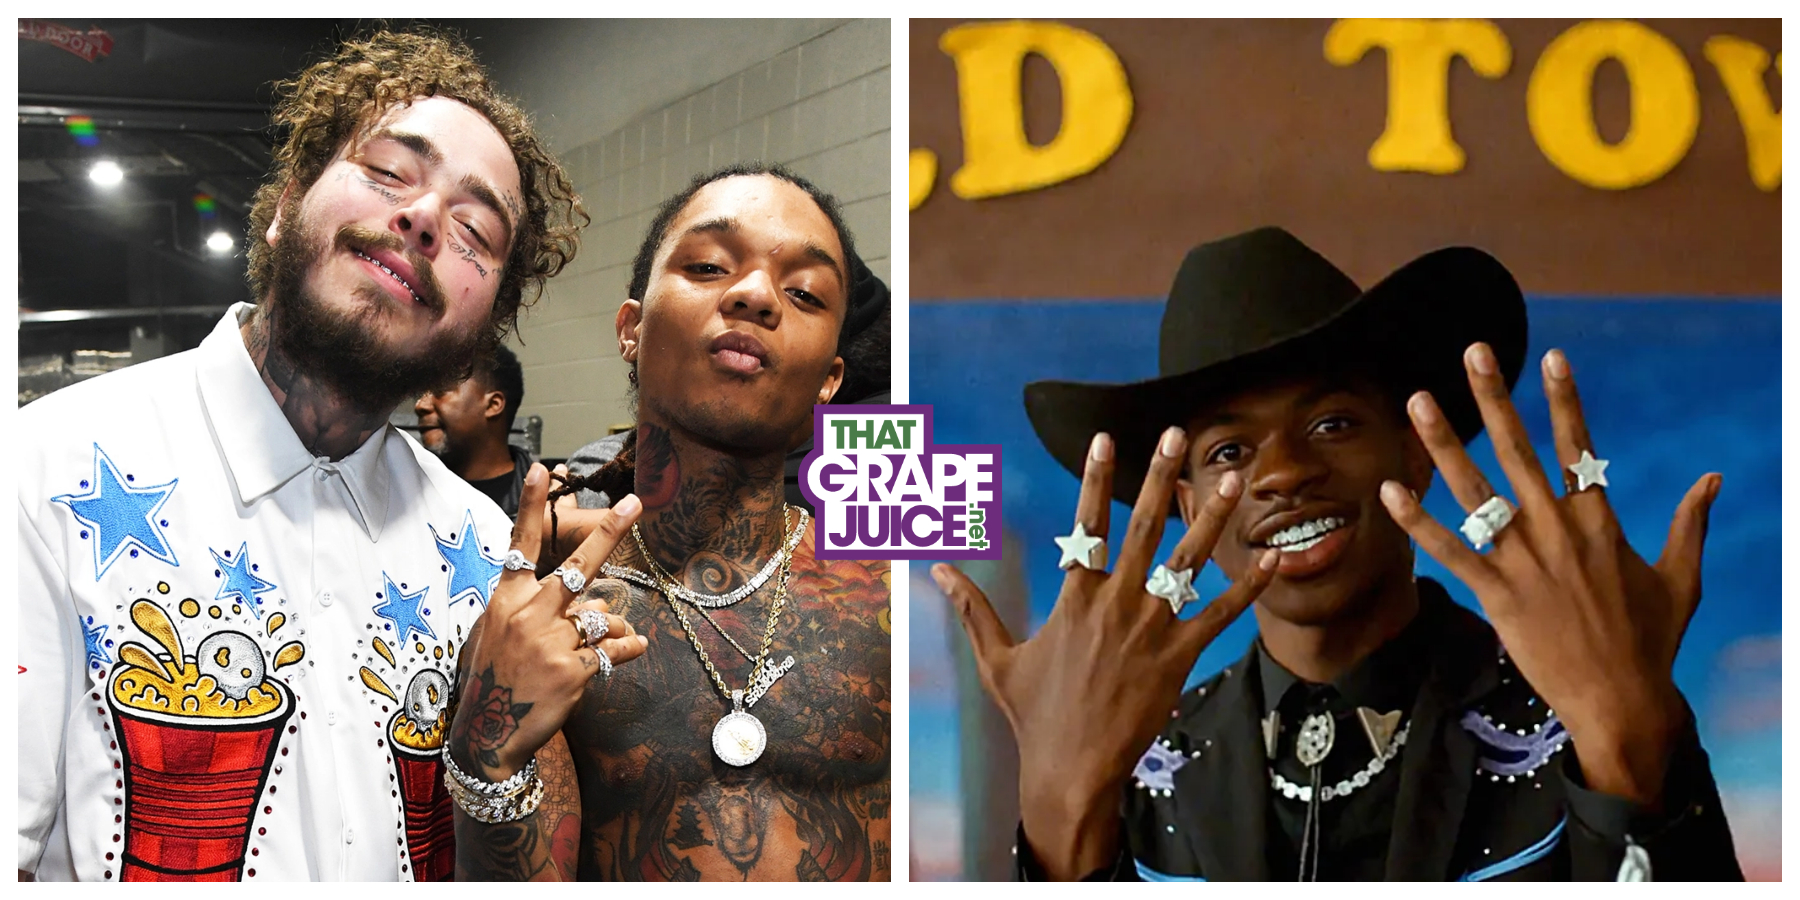 RIAA: Lil Nas X’s ‘Old Town Road’ Ties Post Malone & Swae Lee’s ‘Sunflower’ For Highest-Certified Song in History